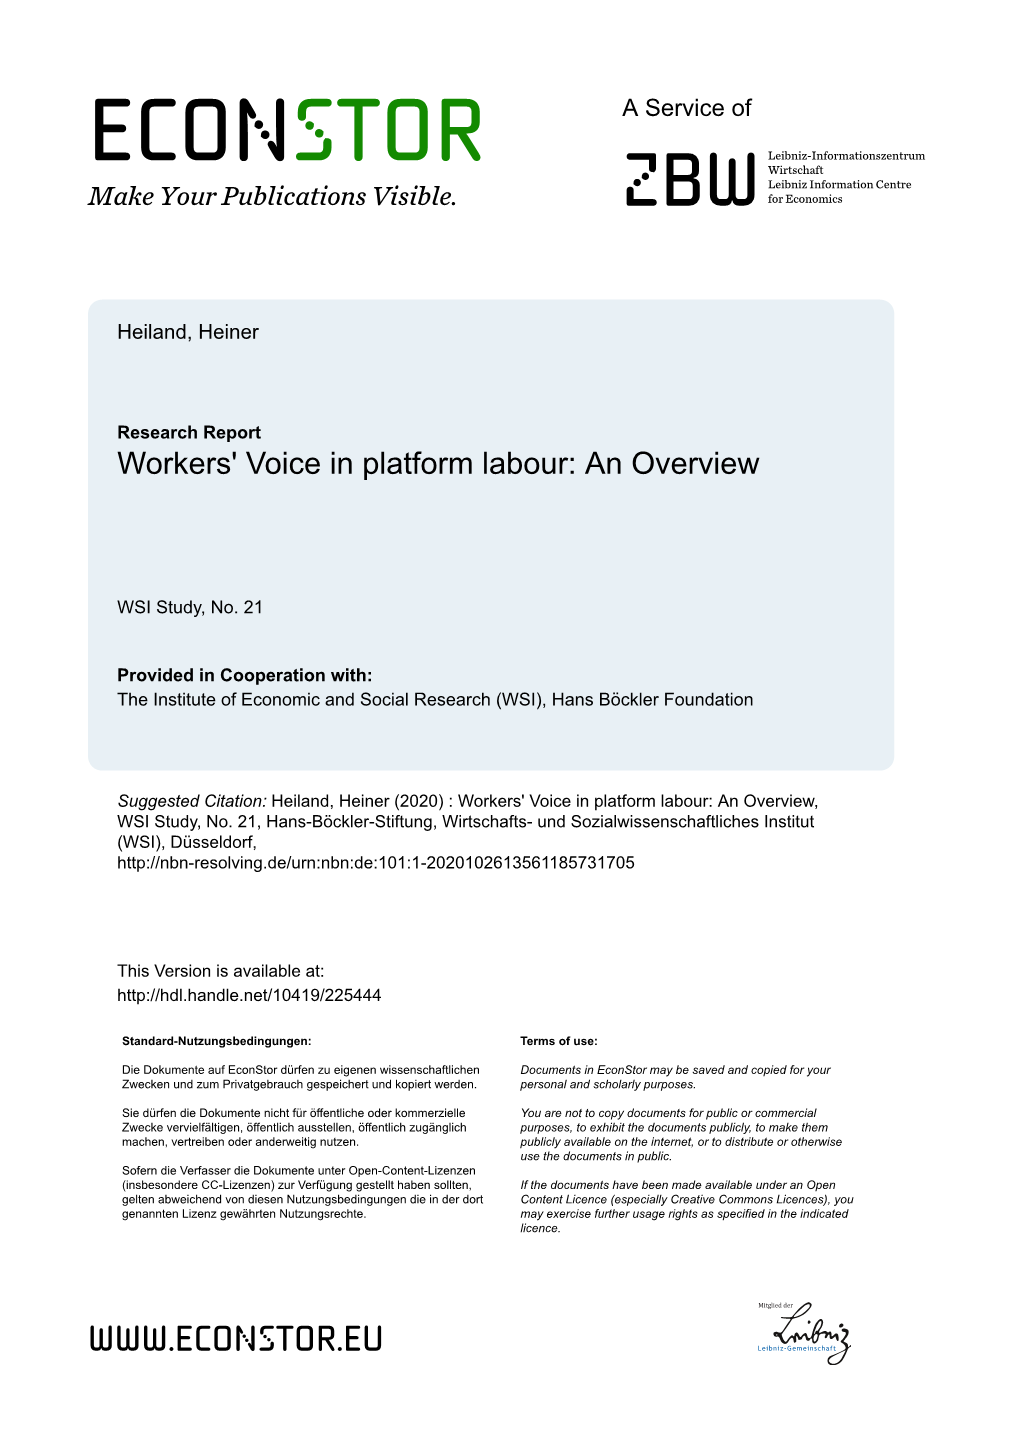 Workers' Voice in Platform Labour: an Overview